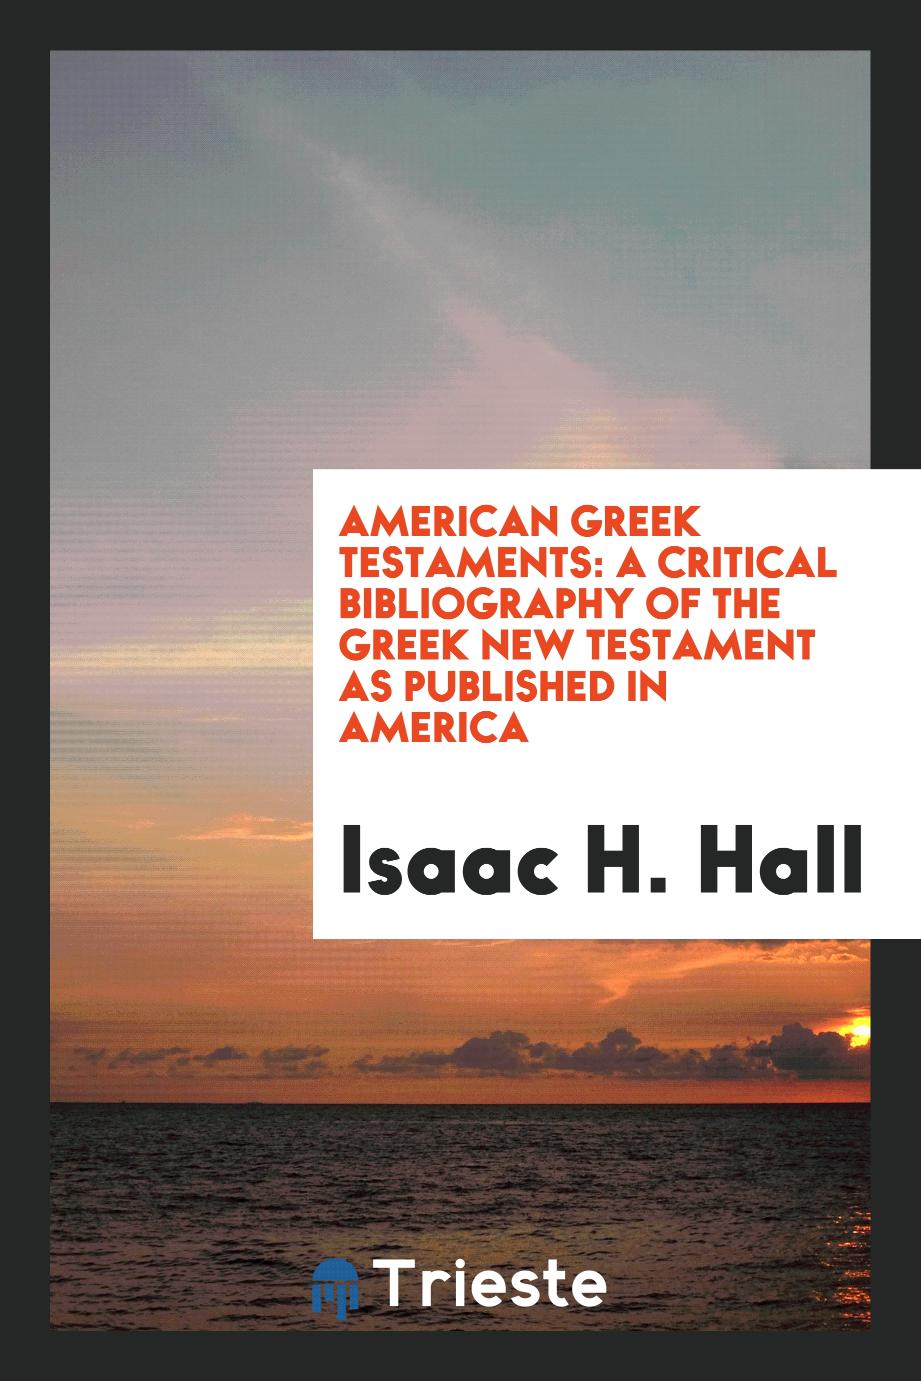 American Greek Testaments: A Critical Bibliography of the Greek New Testament as Published in America